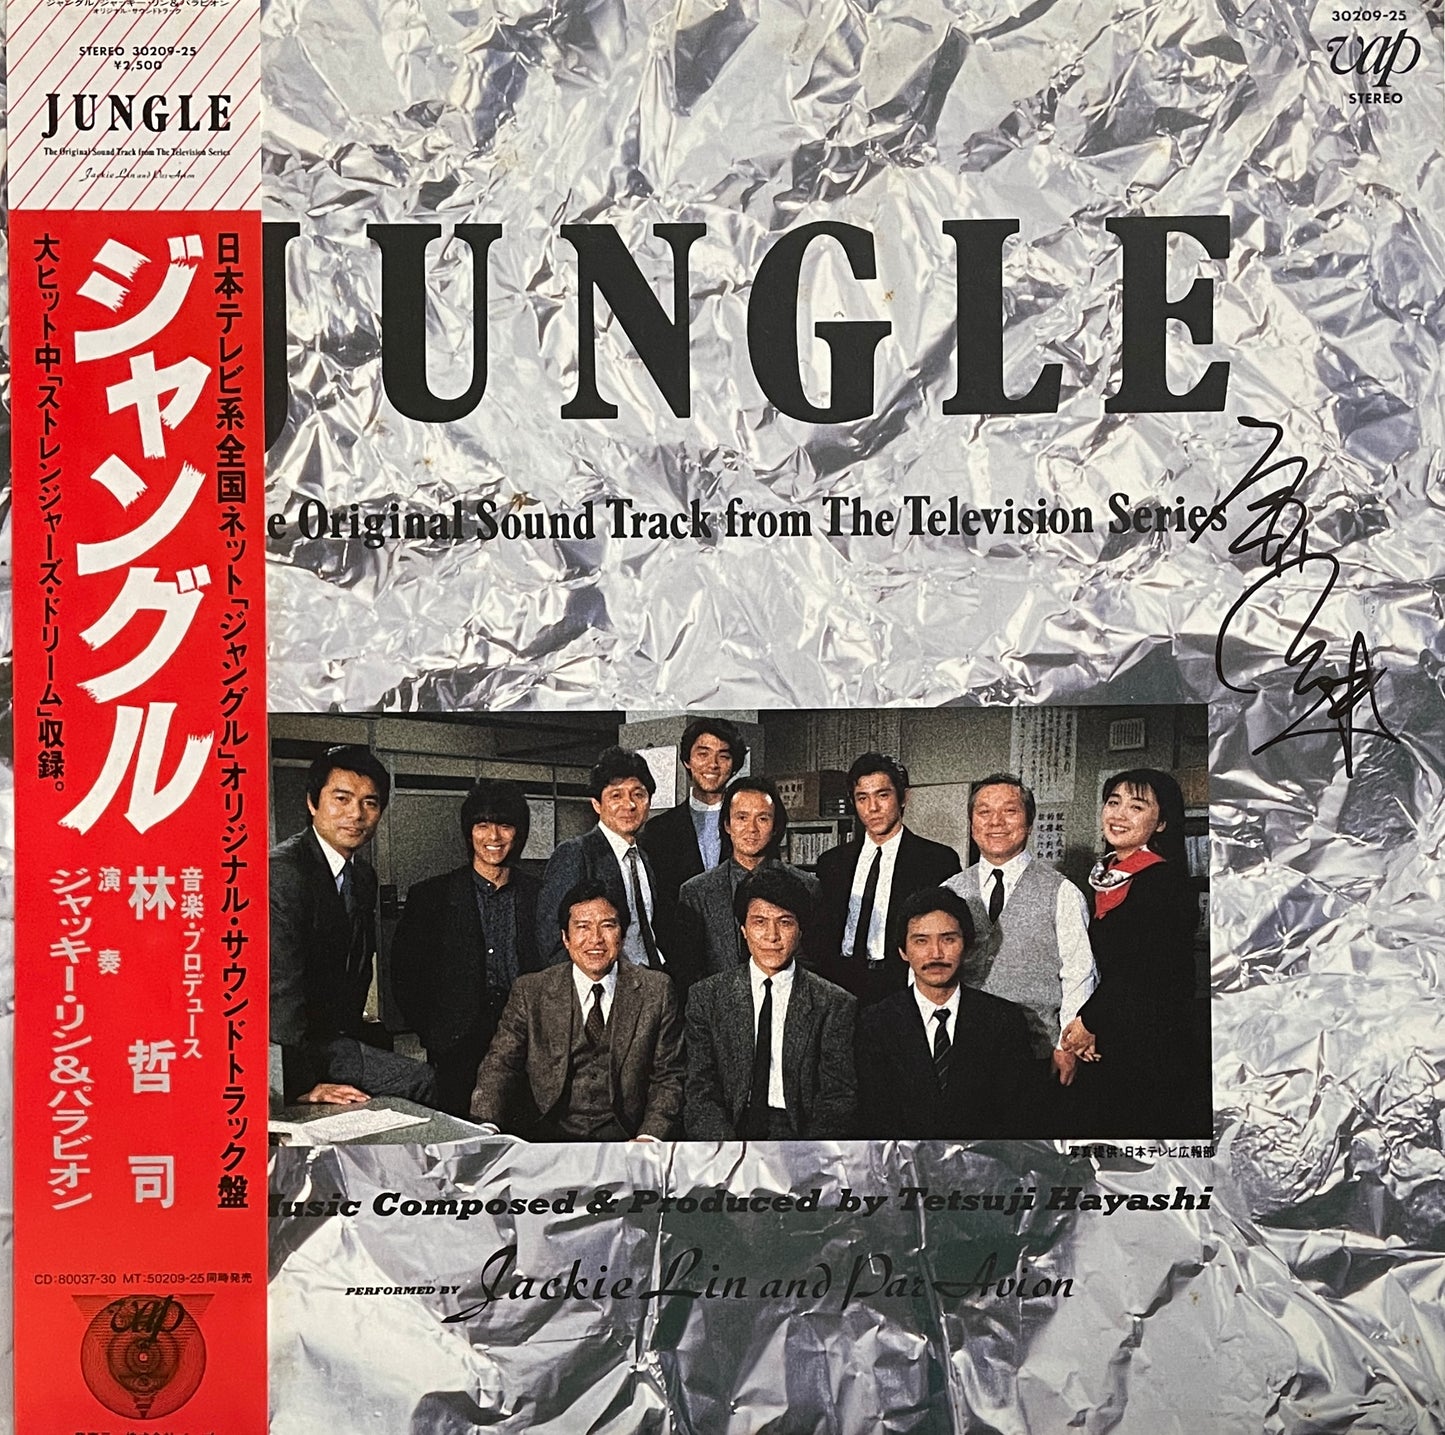 Jungle "The Original Sound Track from The Television Series" (1987)